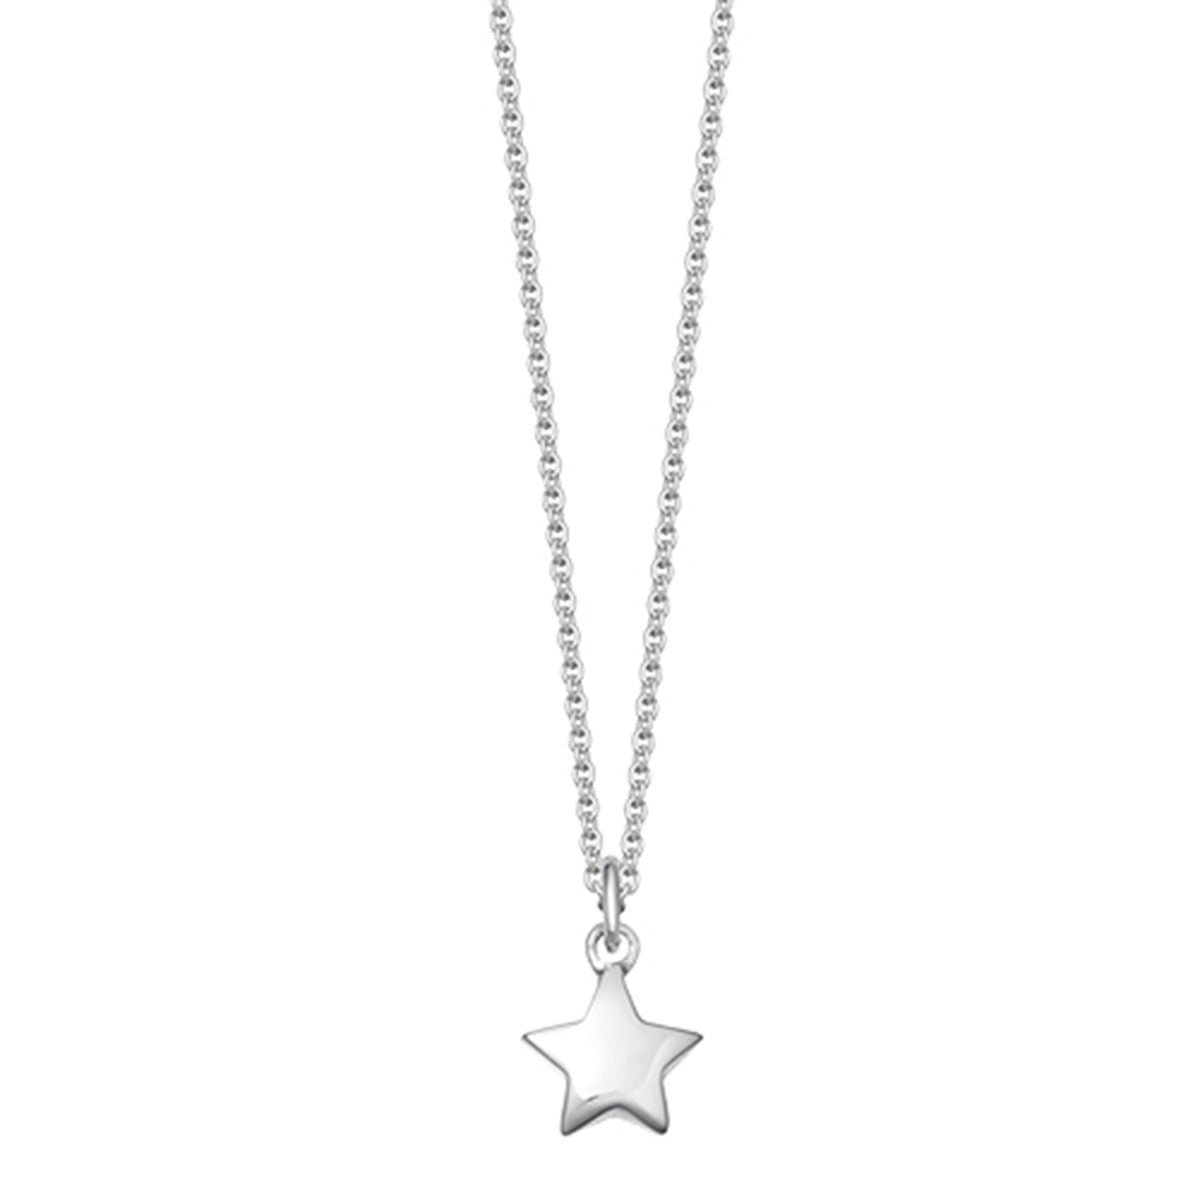 Solid silver star necklace 